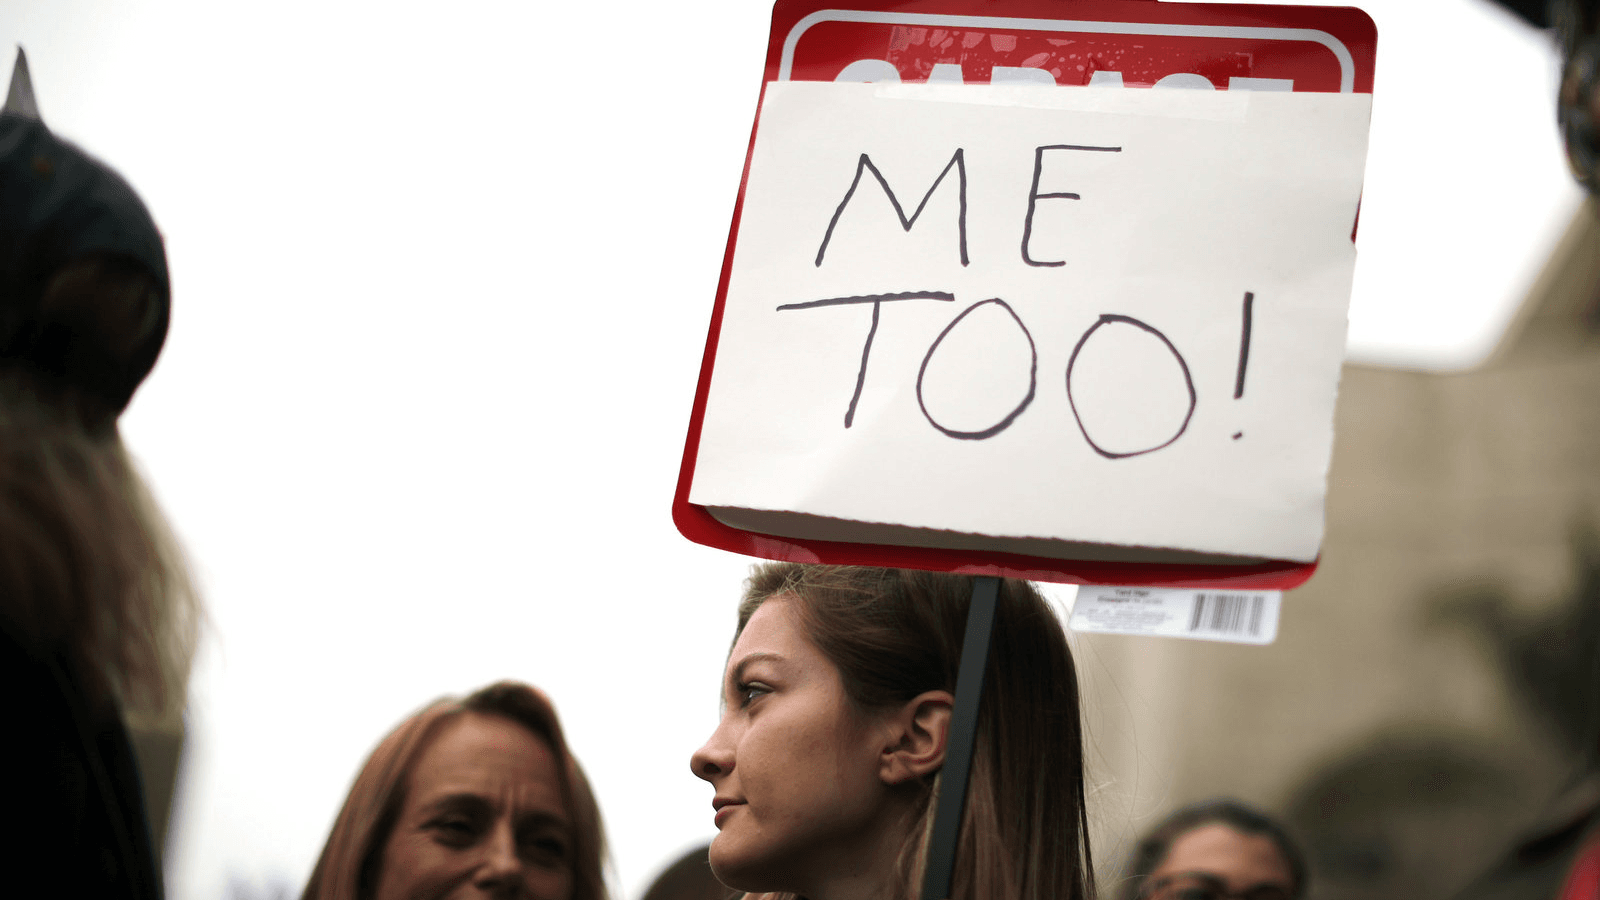 People participate in a "MeToo" protest march for survivors of sexual assault and their supporters in Hollywood, Los Angeles, California, on Nov. 12, 2017.